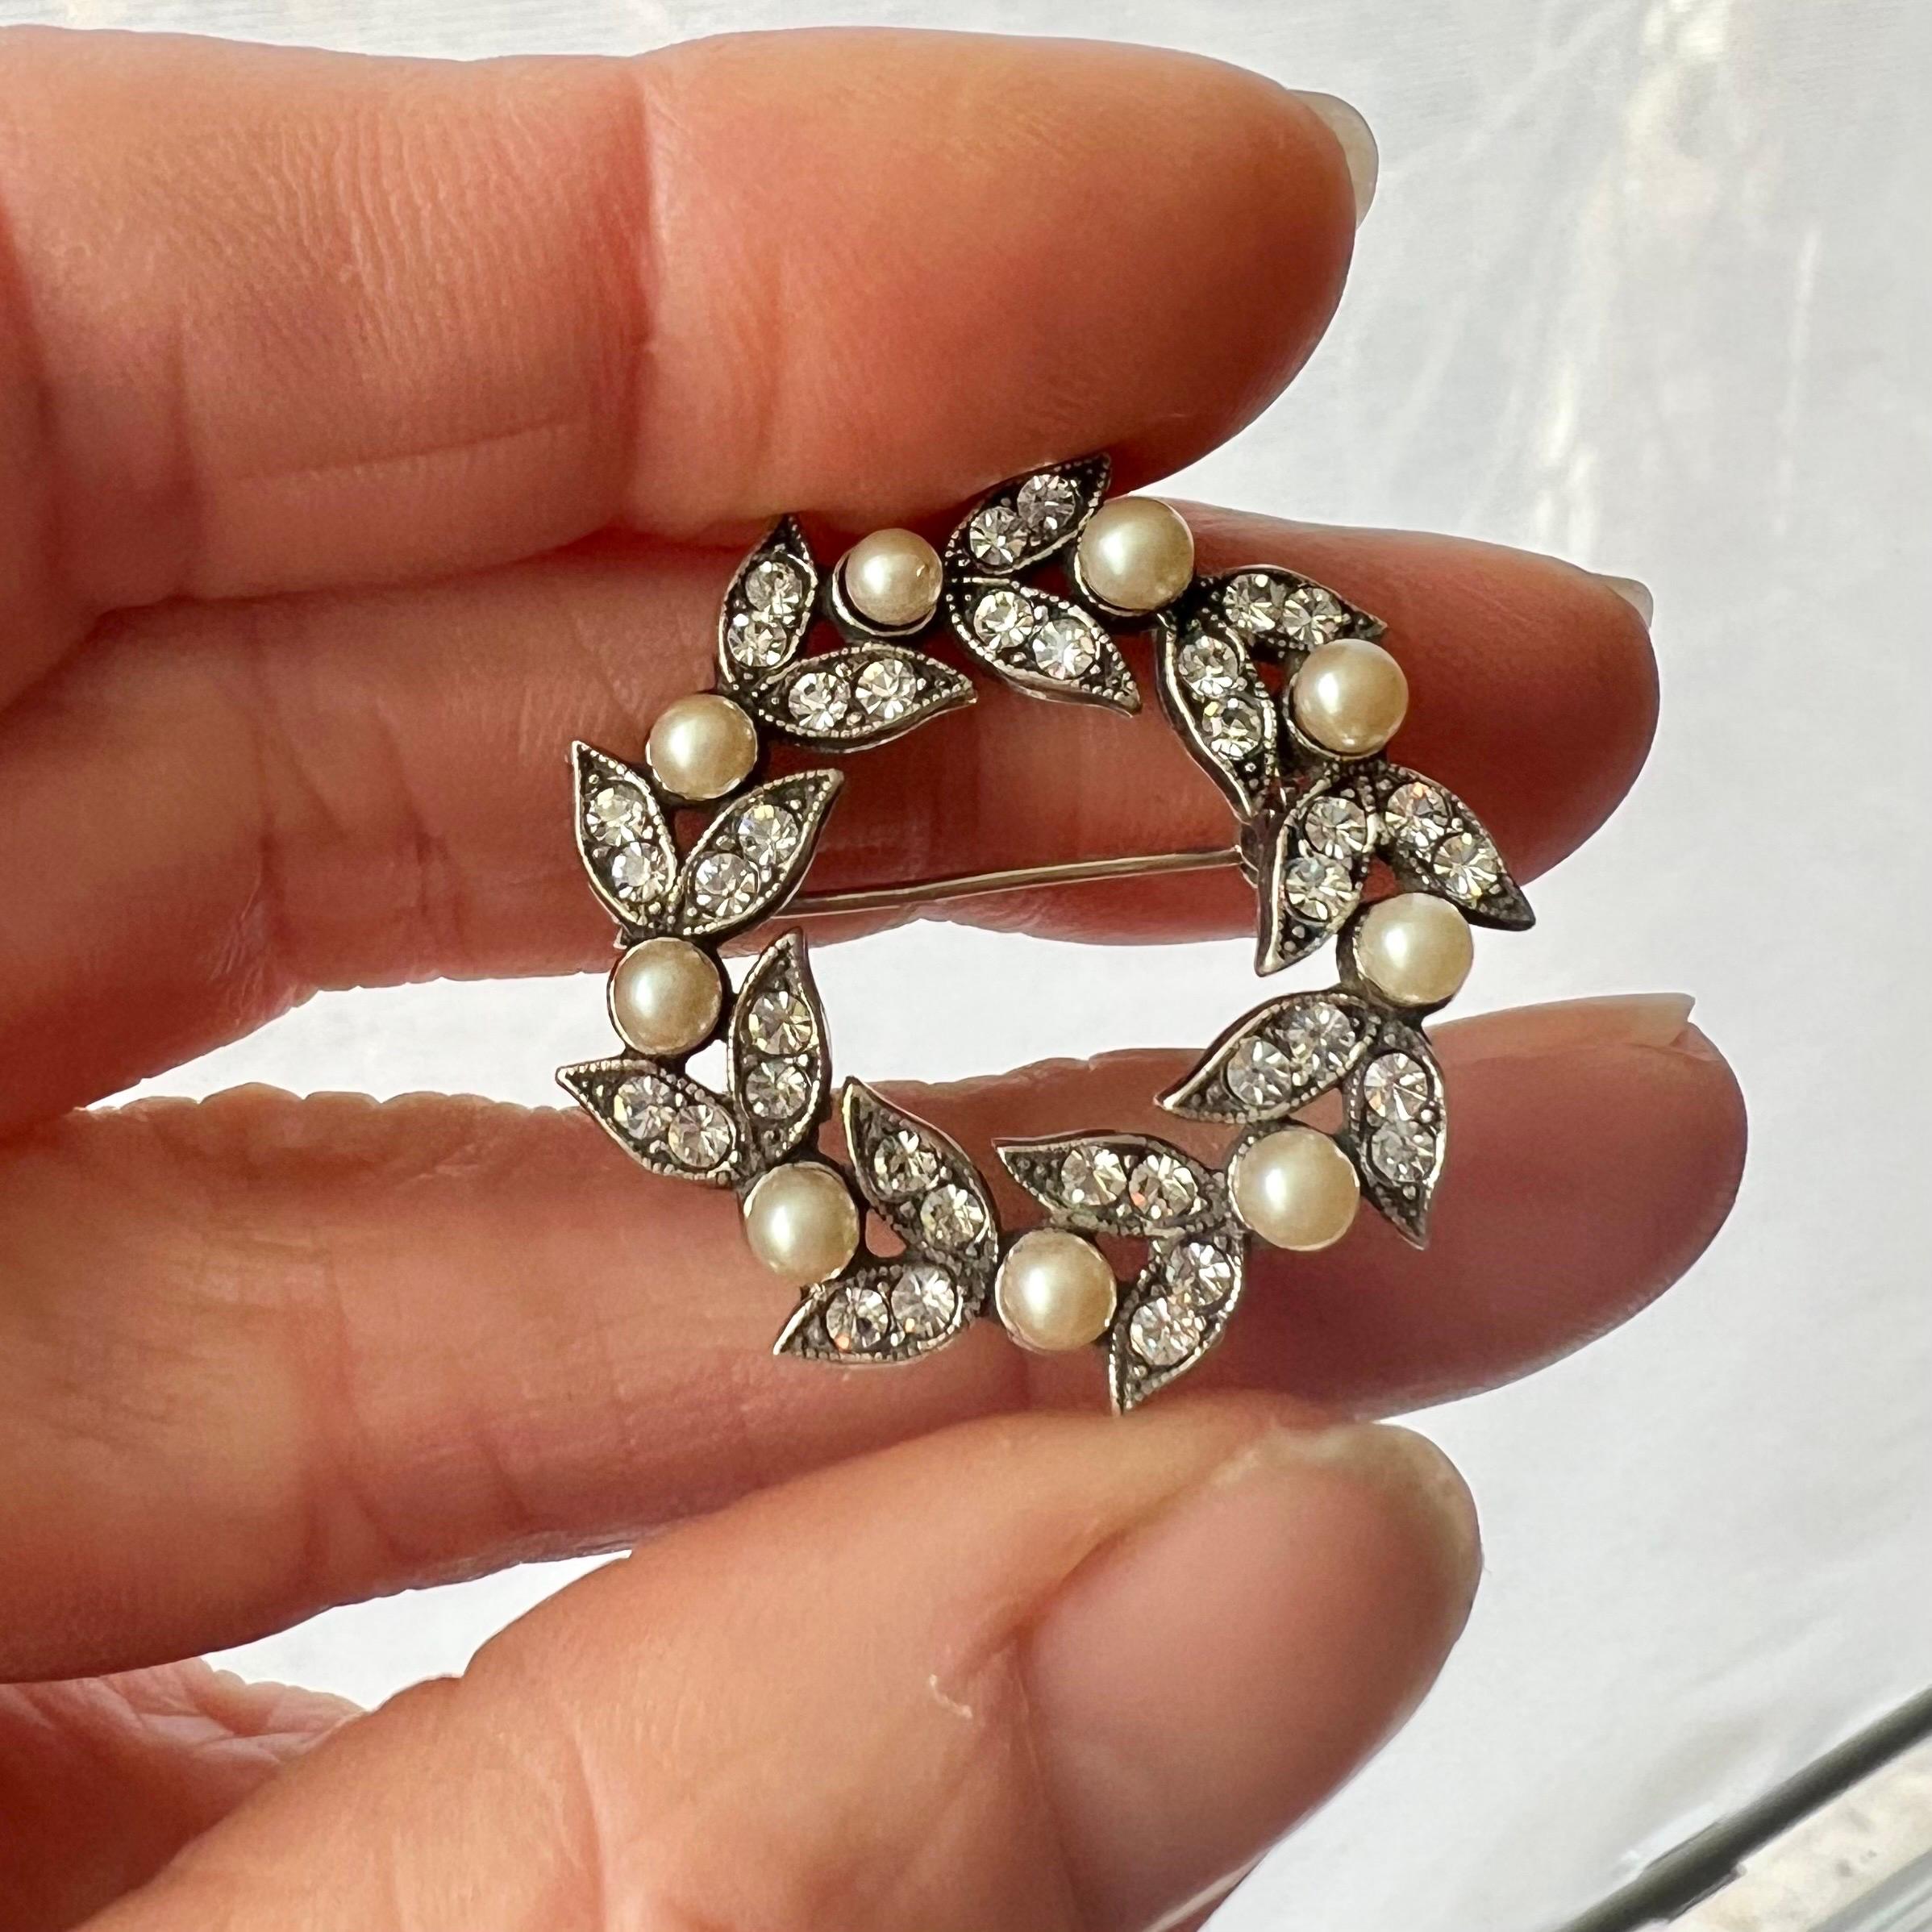 This is a lovely vintage sterling silver round wreath brooch set with faux pearl and glass rhinestones. The brooch is created with diamond-like glass stones also called rhinestones these stones are set in silver shaped petals. The rim of the petals